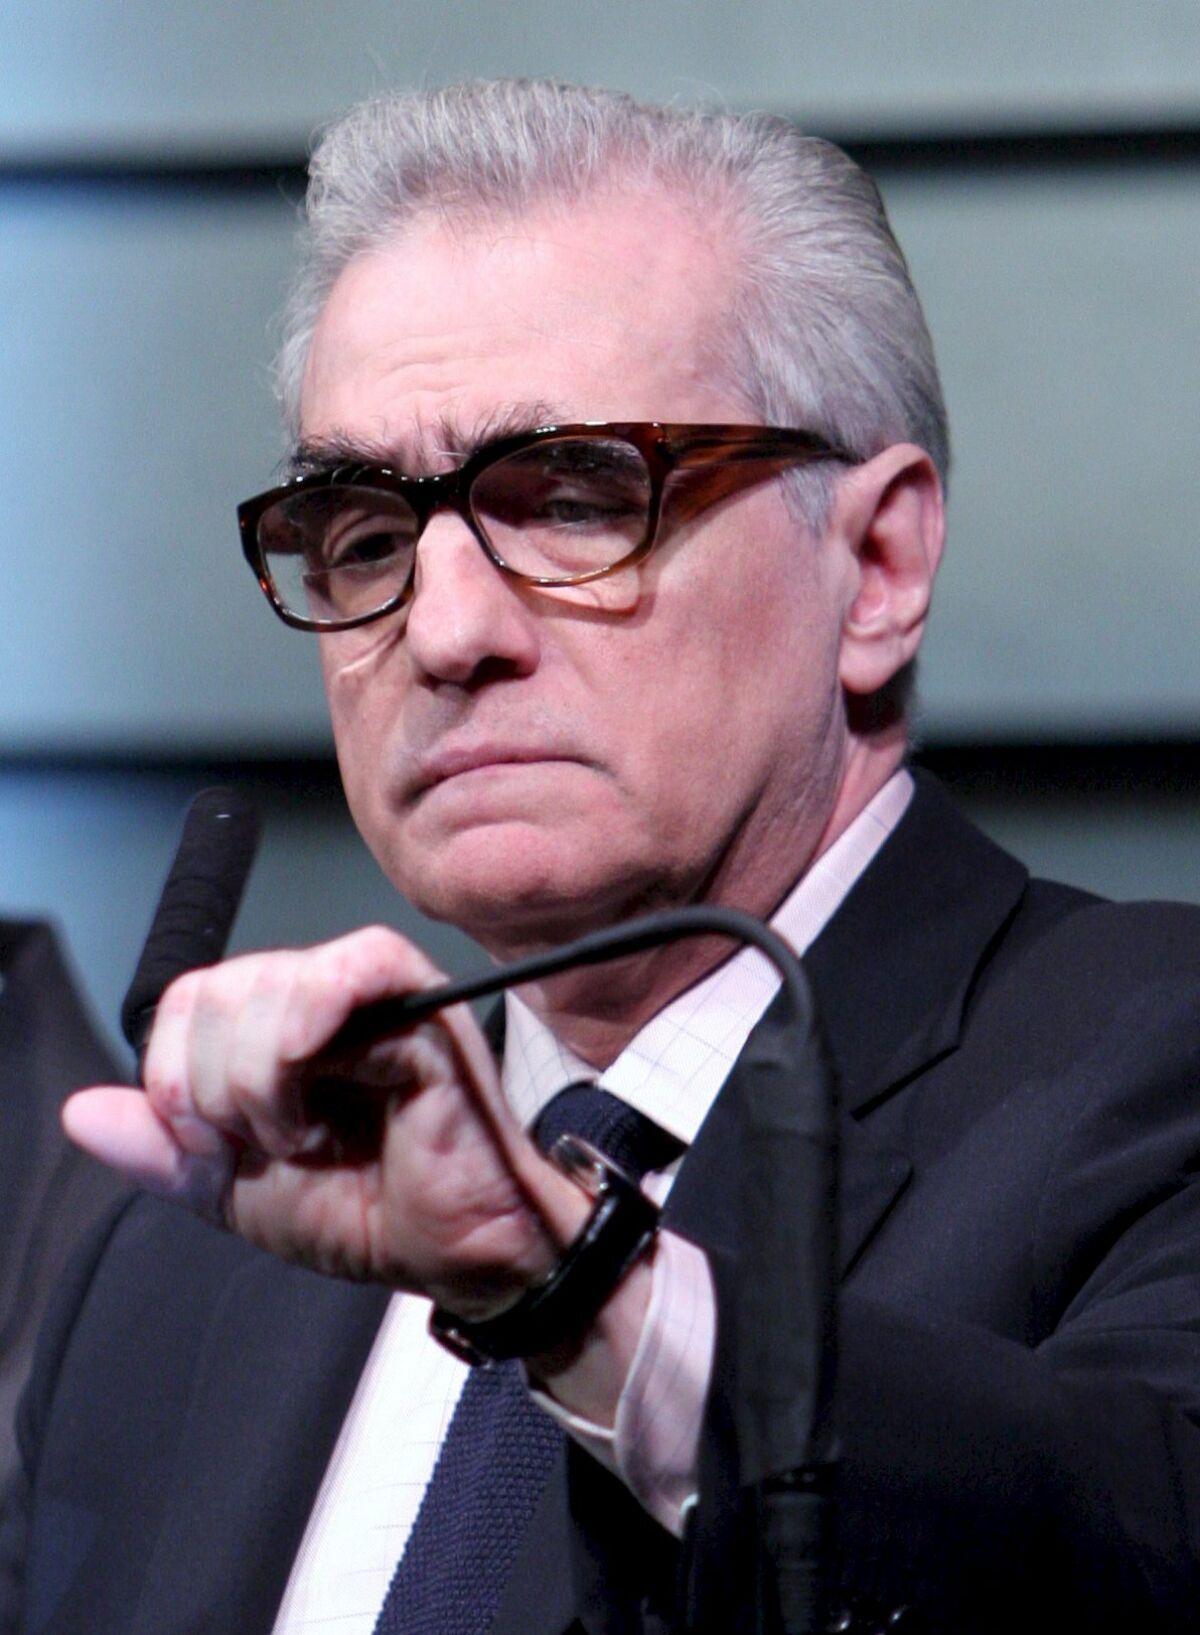 Scorsese vuelve a Cannes tras 37 años con Killers of the Flower Moon